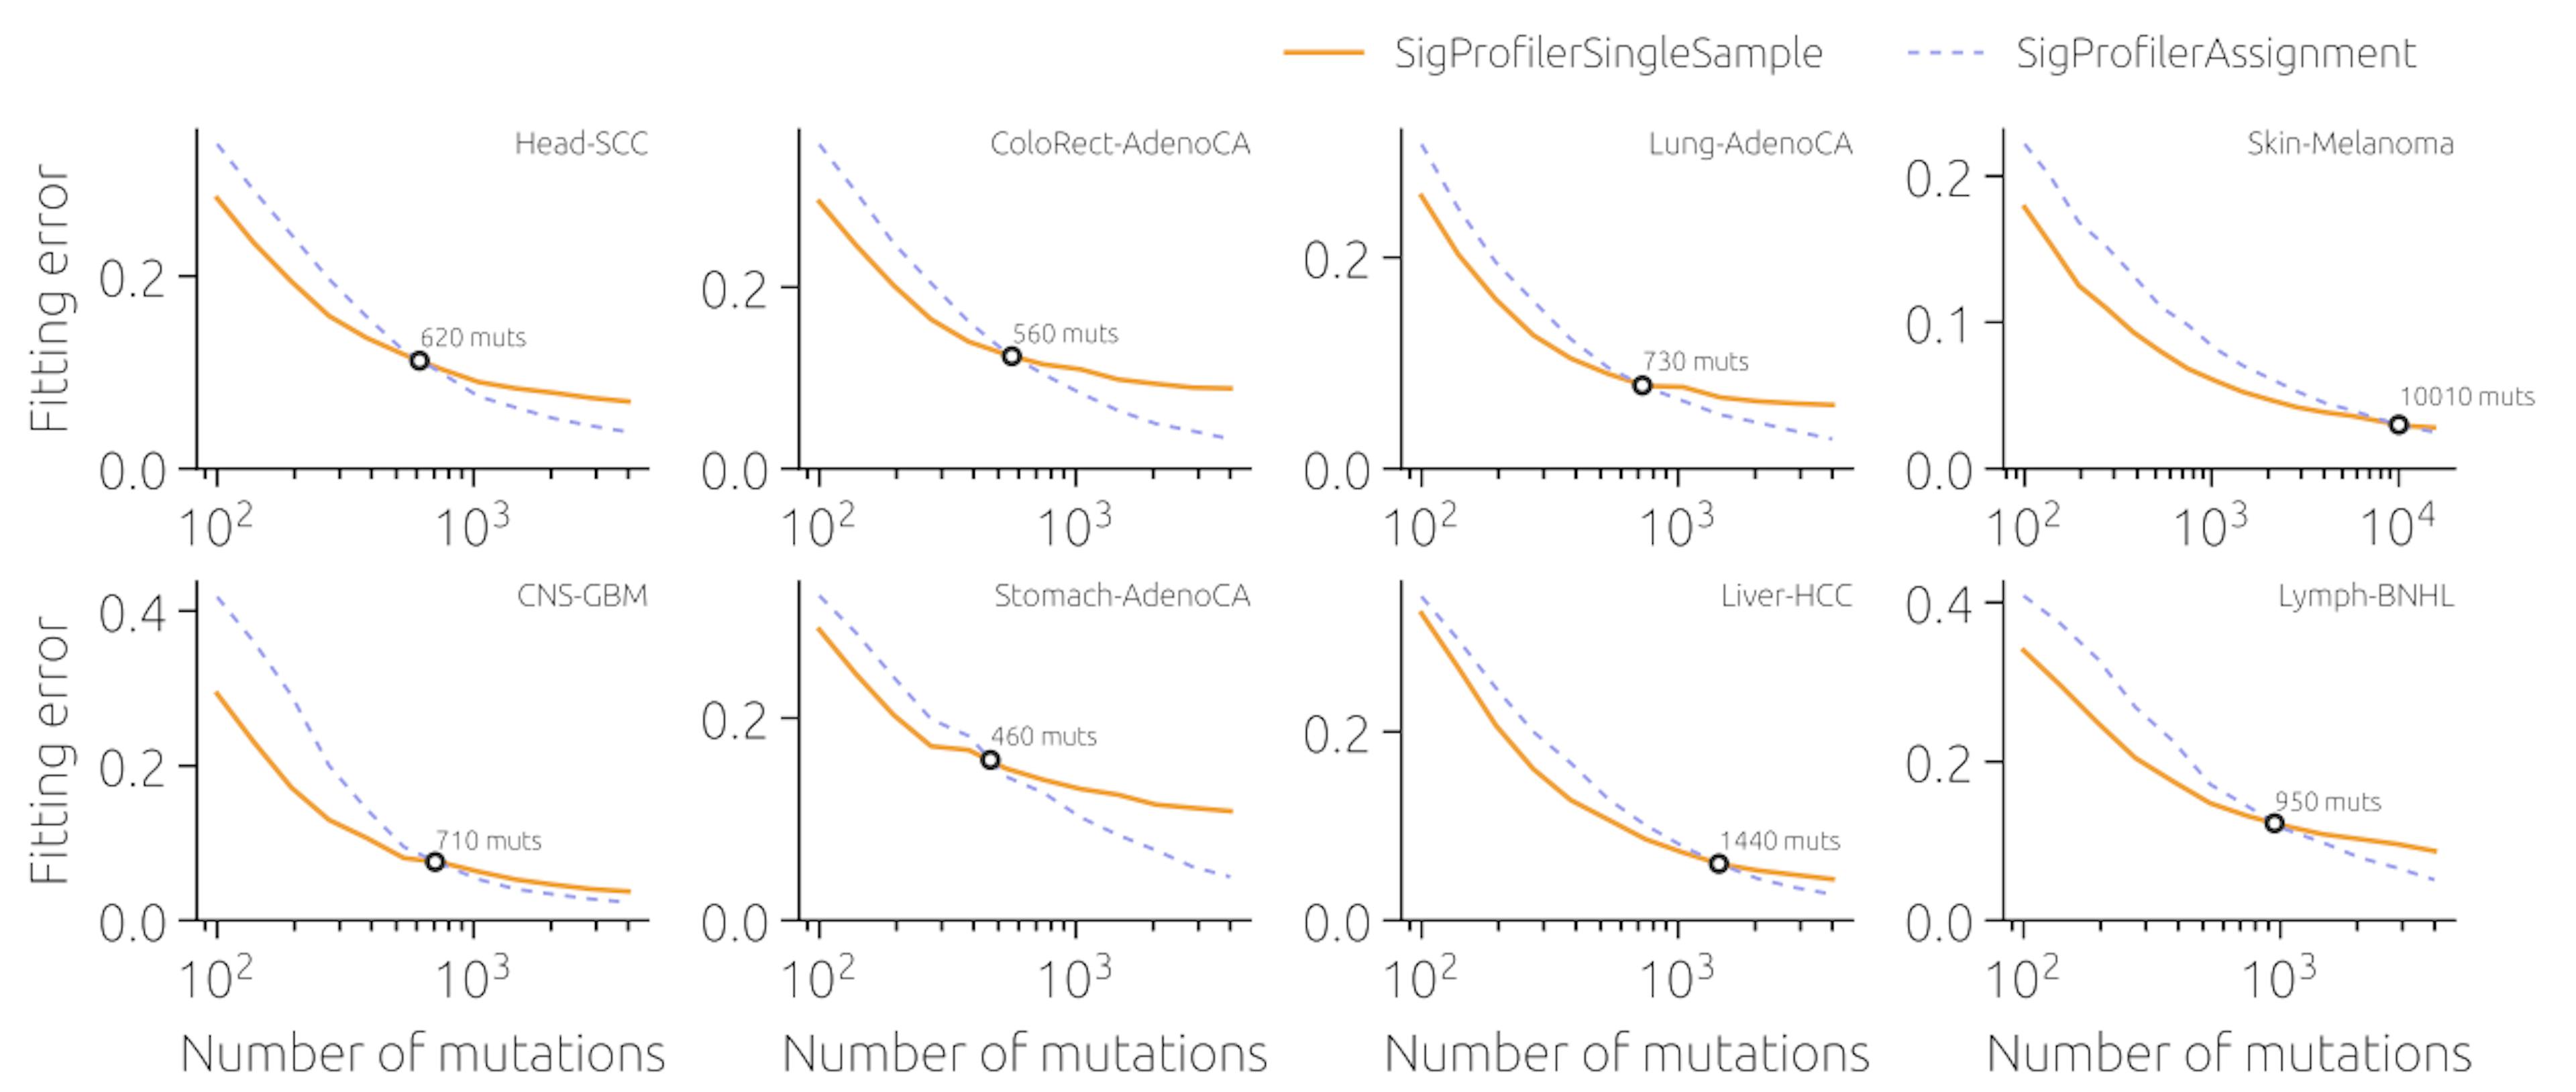 Supplementary Figure 20: By increasing the number of mutations per sample in small steps, we identify the number ofmutations at which SigProfilerAssignment starts to outperform SigProfilerSingleSample for each cancer type (using